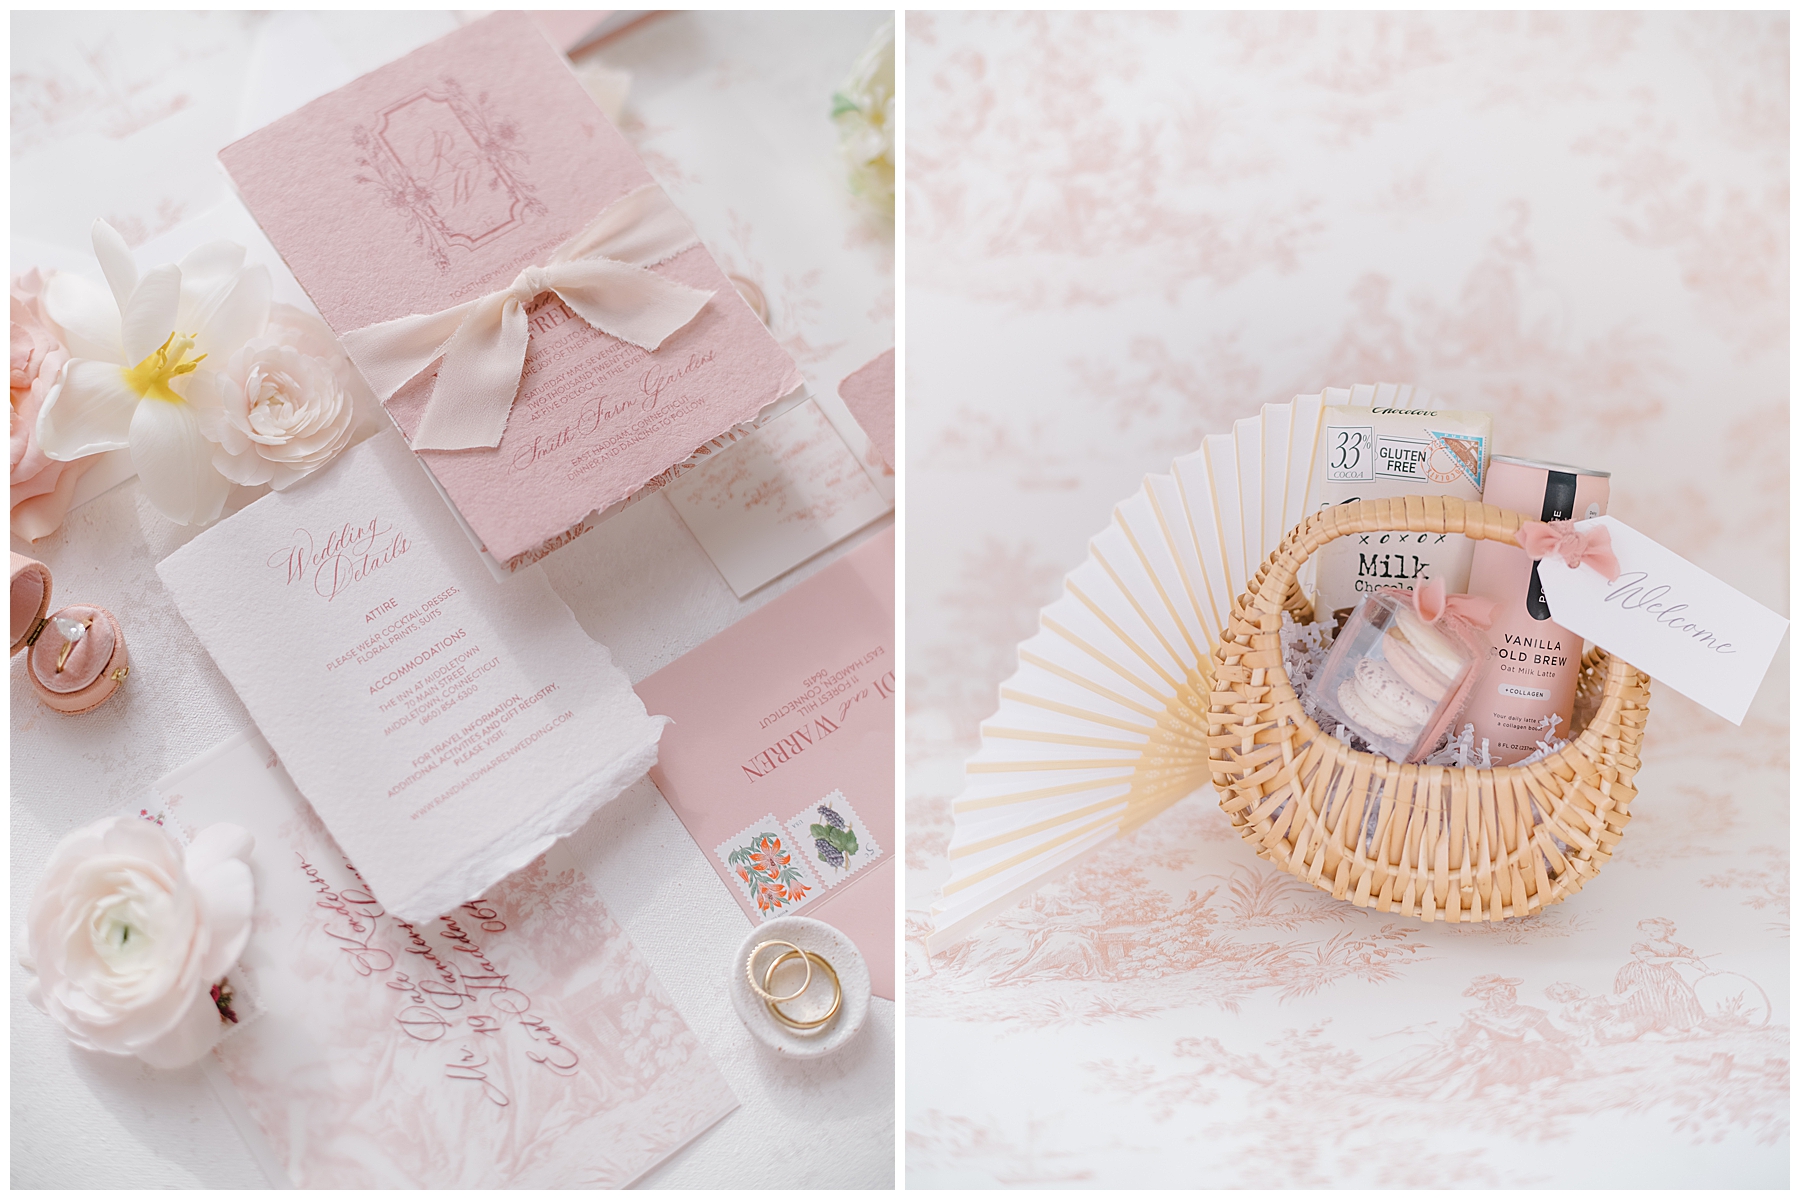 wedding details and favors in blush pink tones